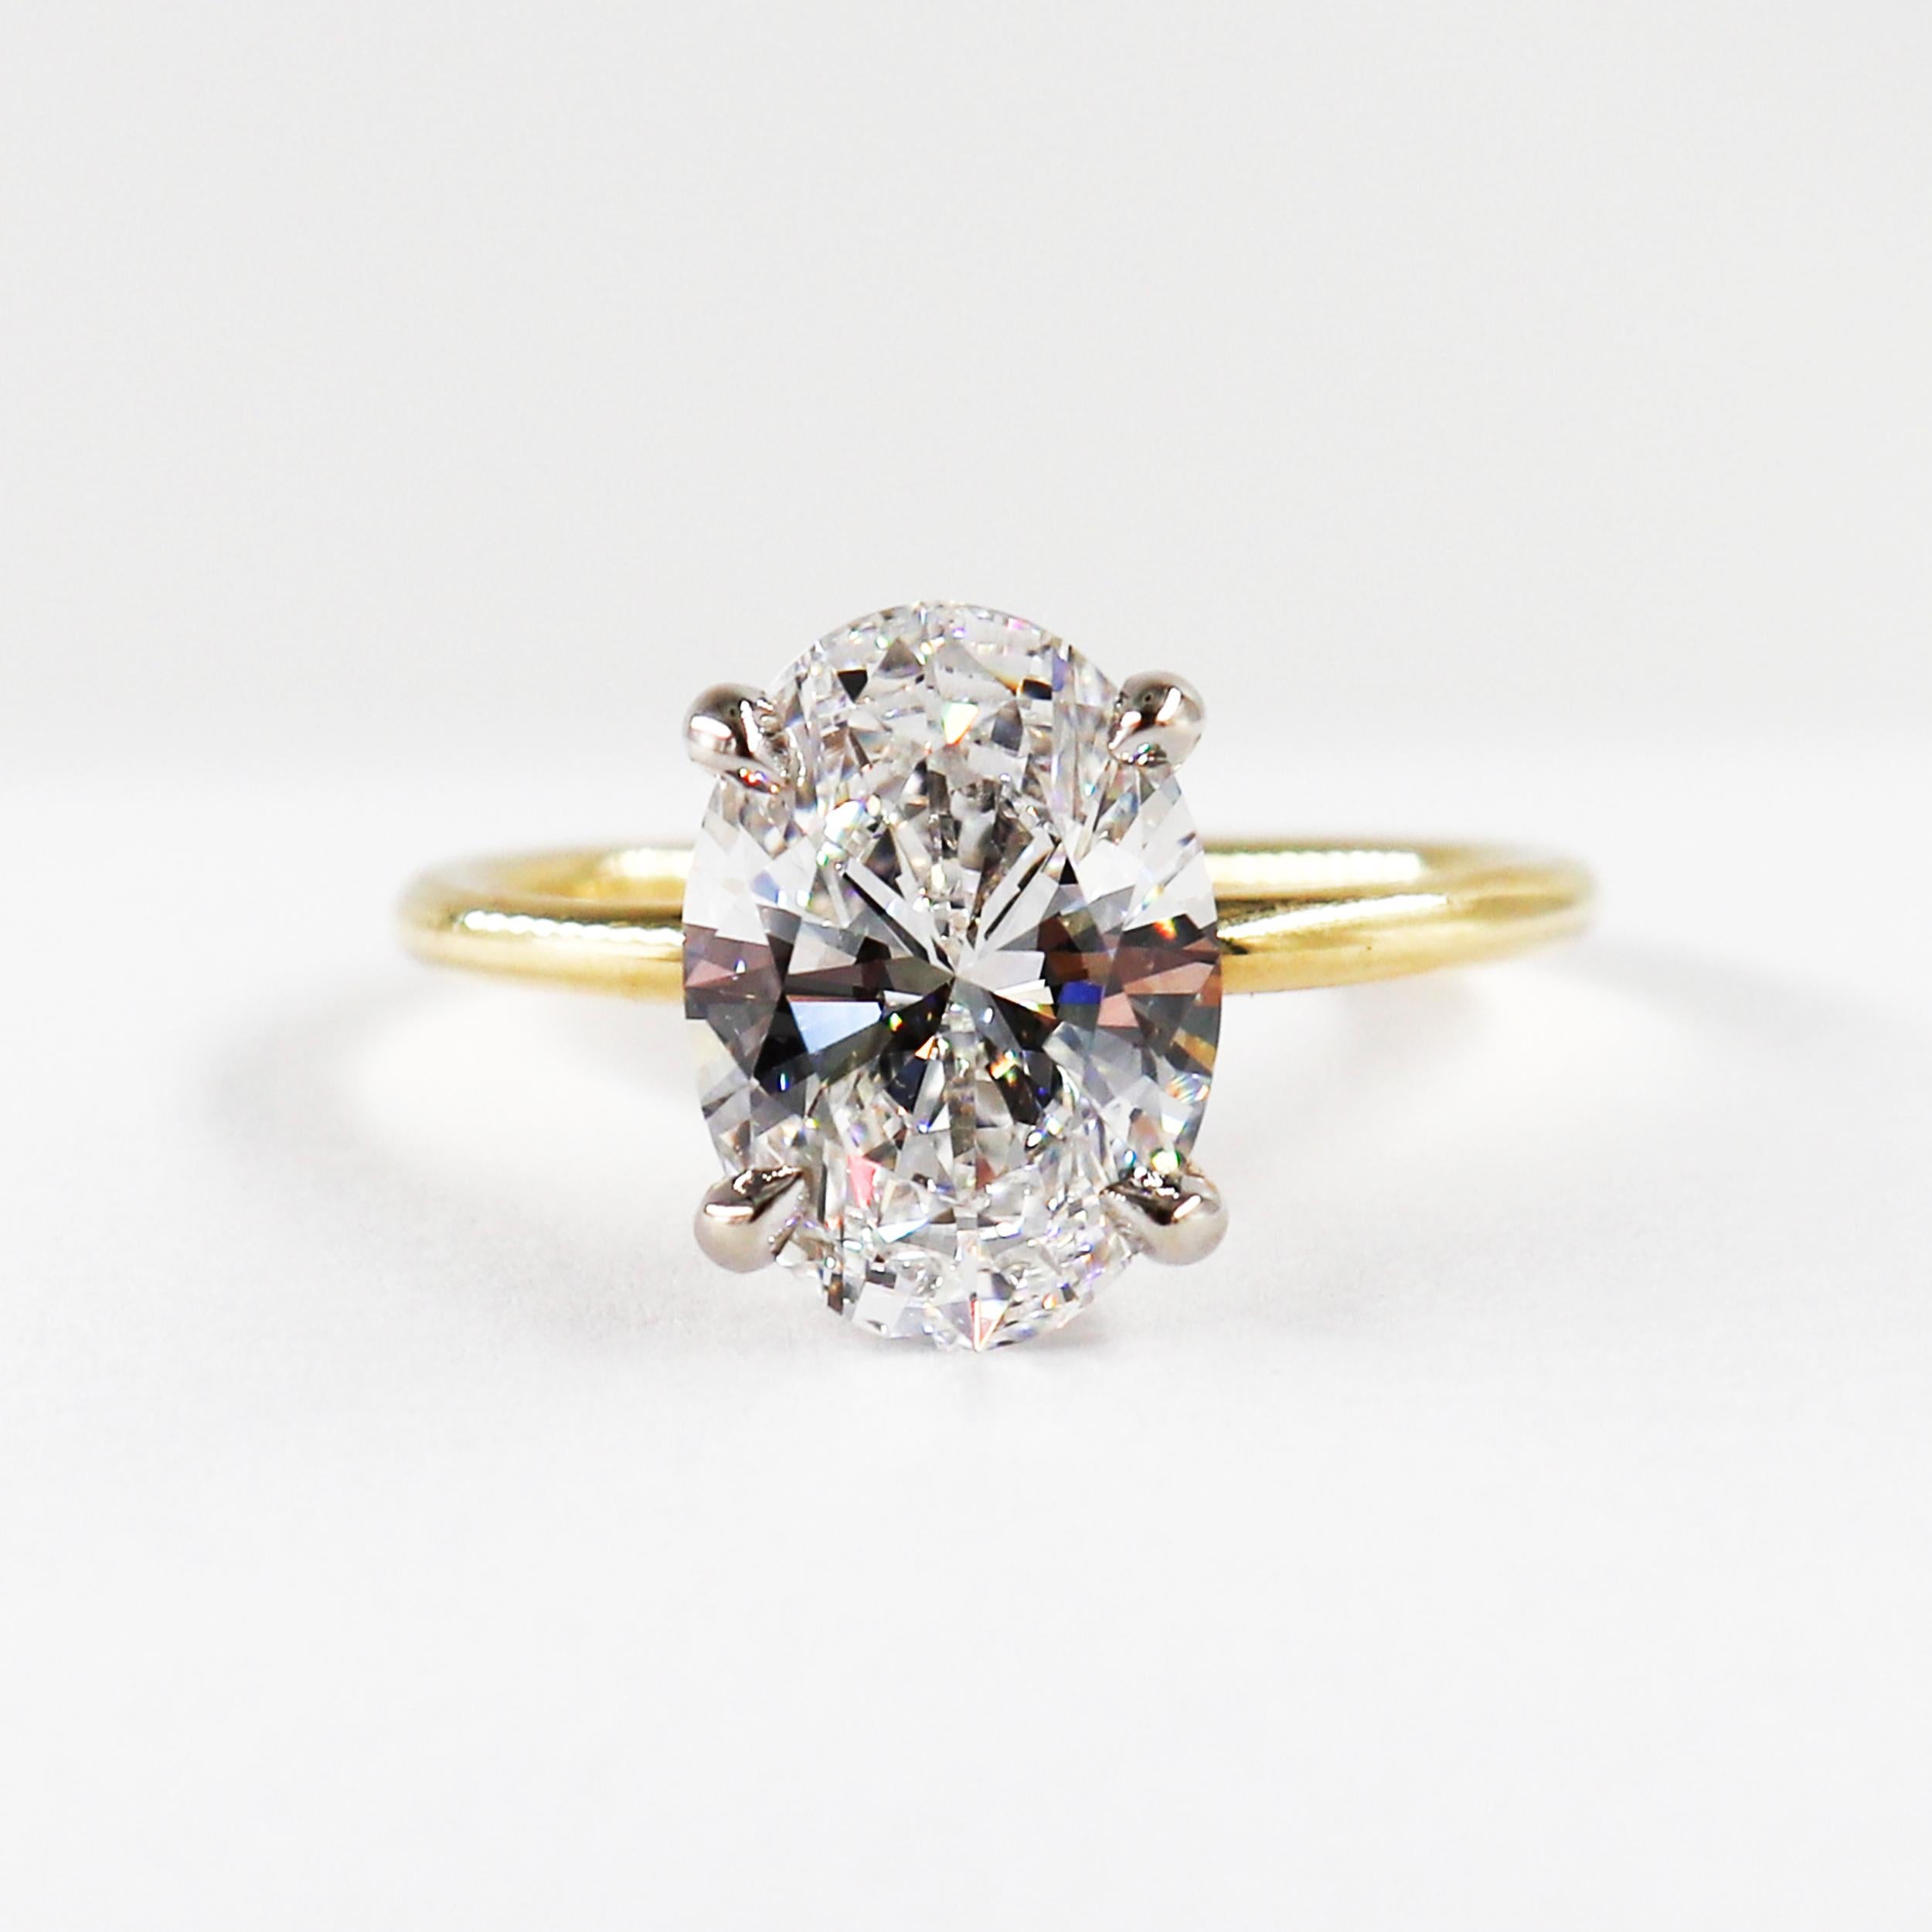 This classy J. Birnbach solitaire ring features a 3.03 carat Oval Cut GIA Certified diamond with E color and IF clarity. The Diamond is set in a rounded 18 Karat Yellow gold mounting with platinum prongs with a discreet and elegant hidden pave